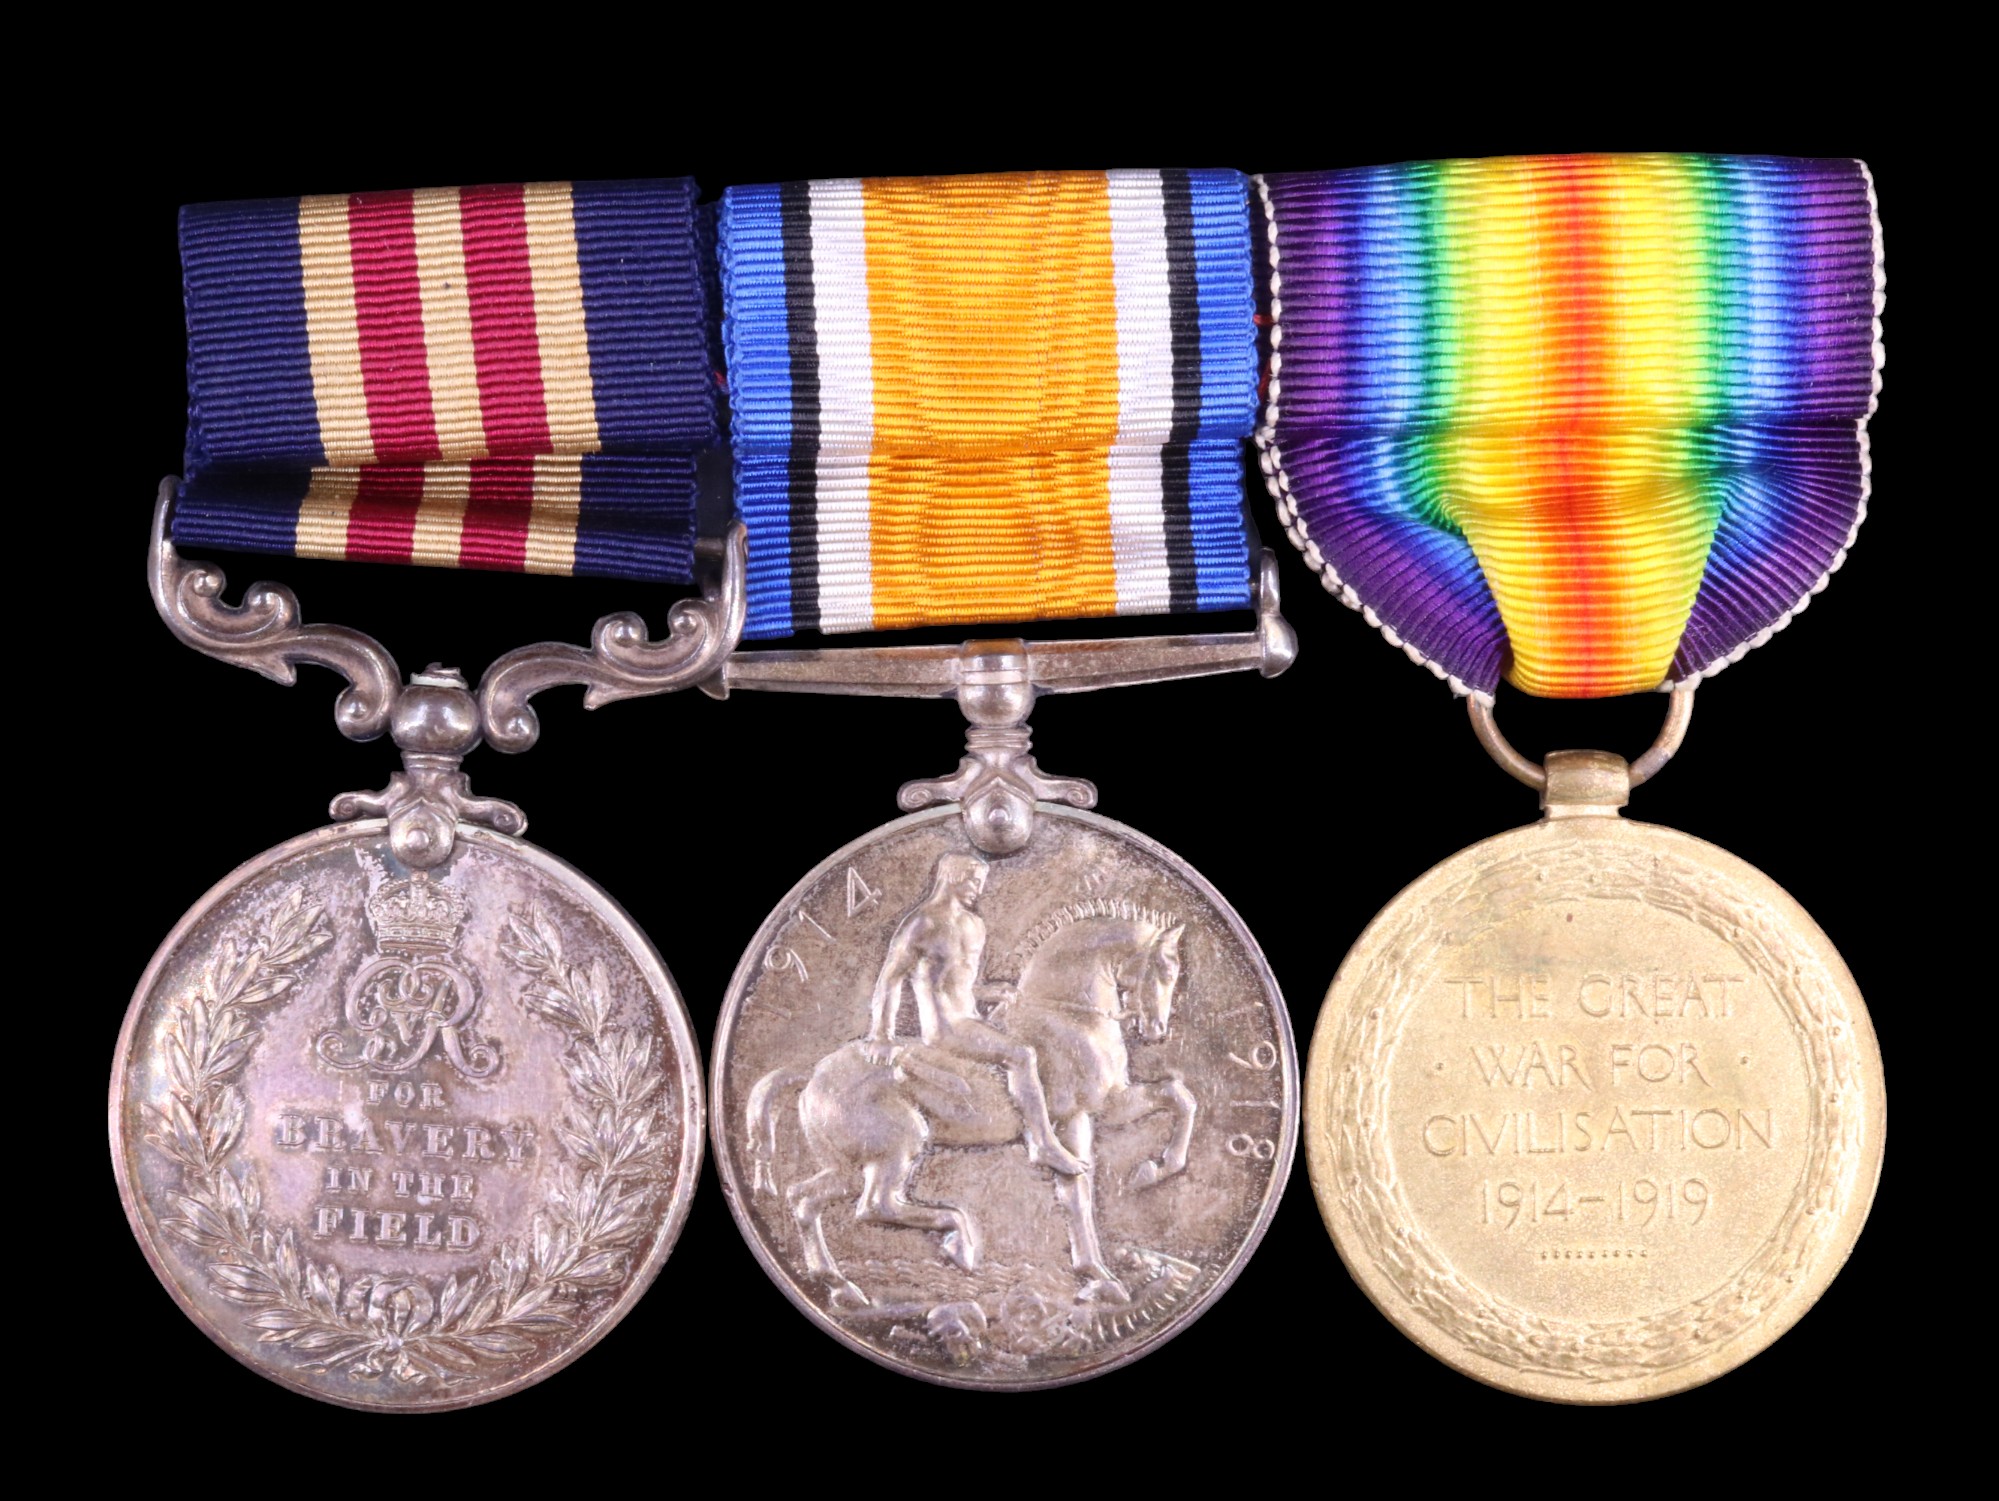 A Military Medal with British War and Victory Medals to DM2-206580 Pte Robert Armstrong, Army - Image 3 of 9